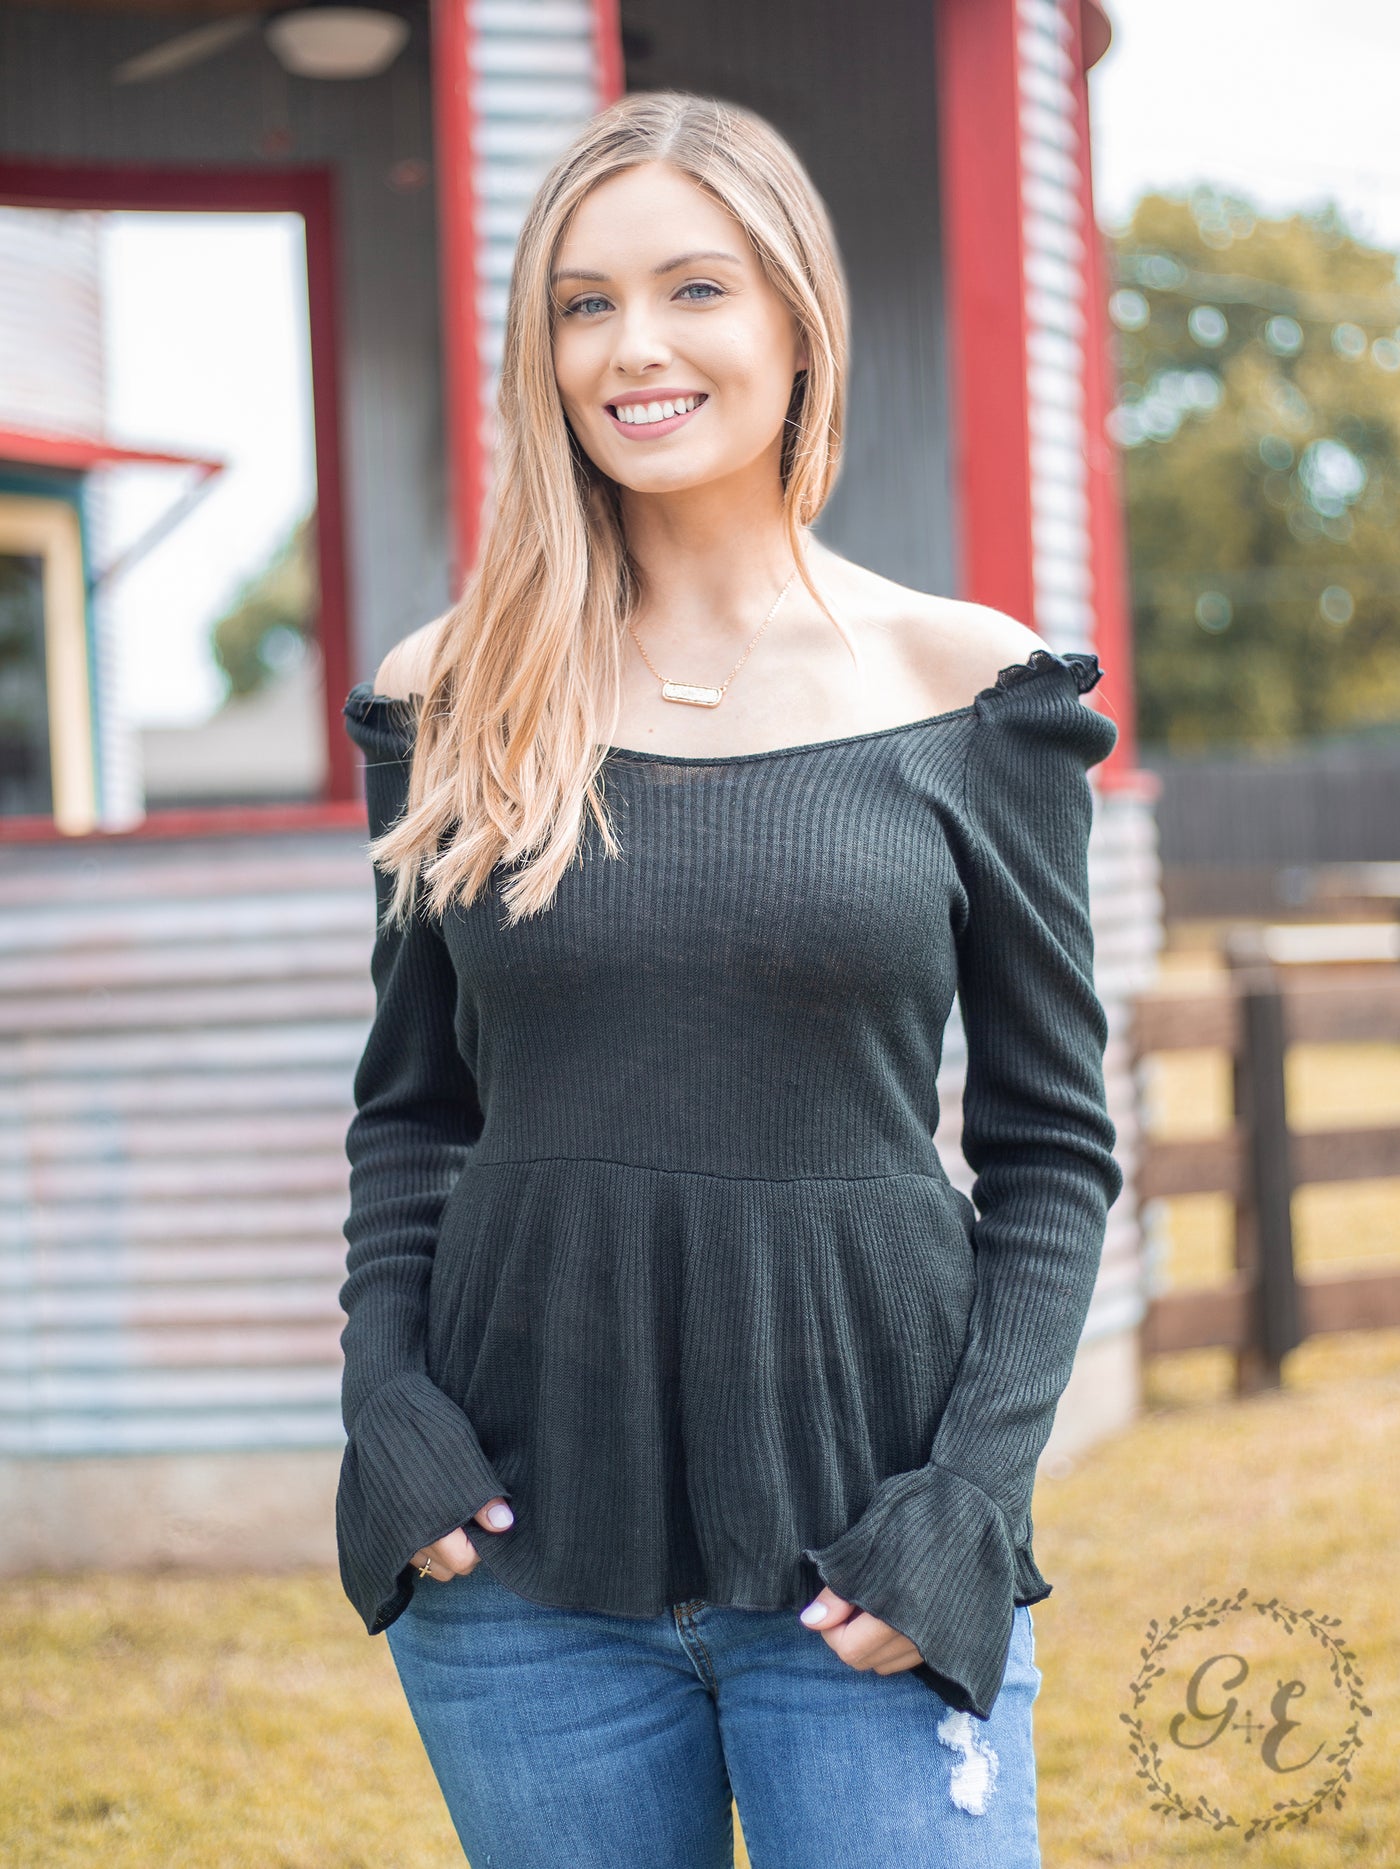 How 'Bout Those Ruffles Long Sleeve With Neck Line Ruffles, Black